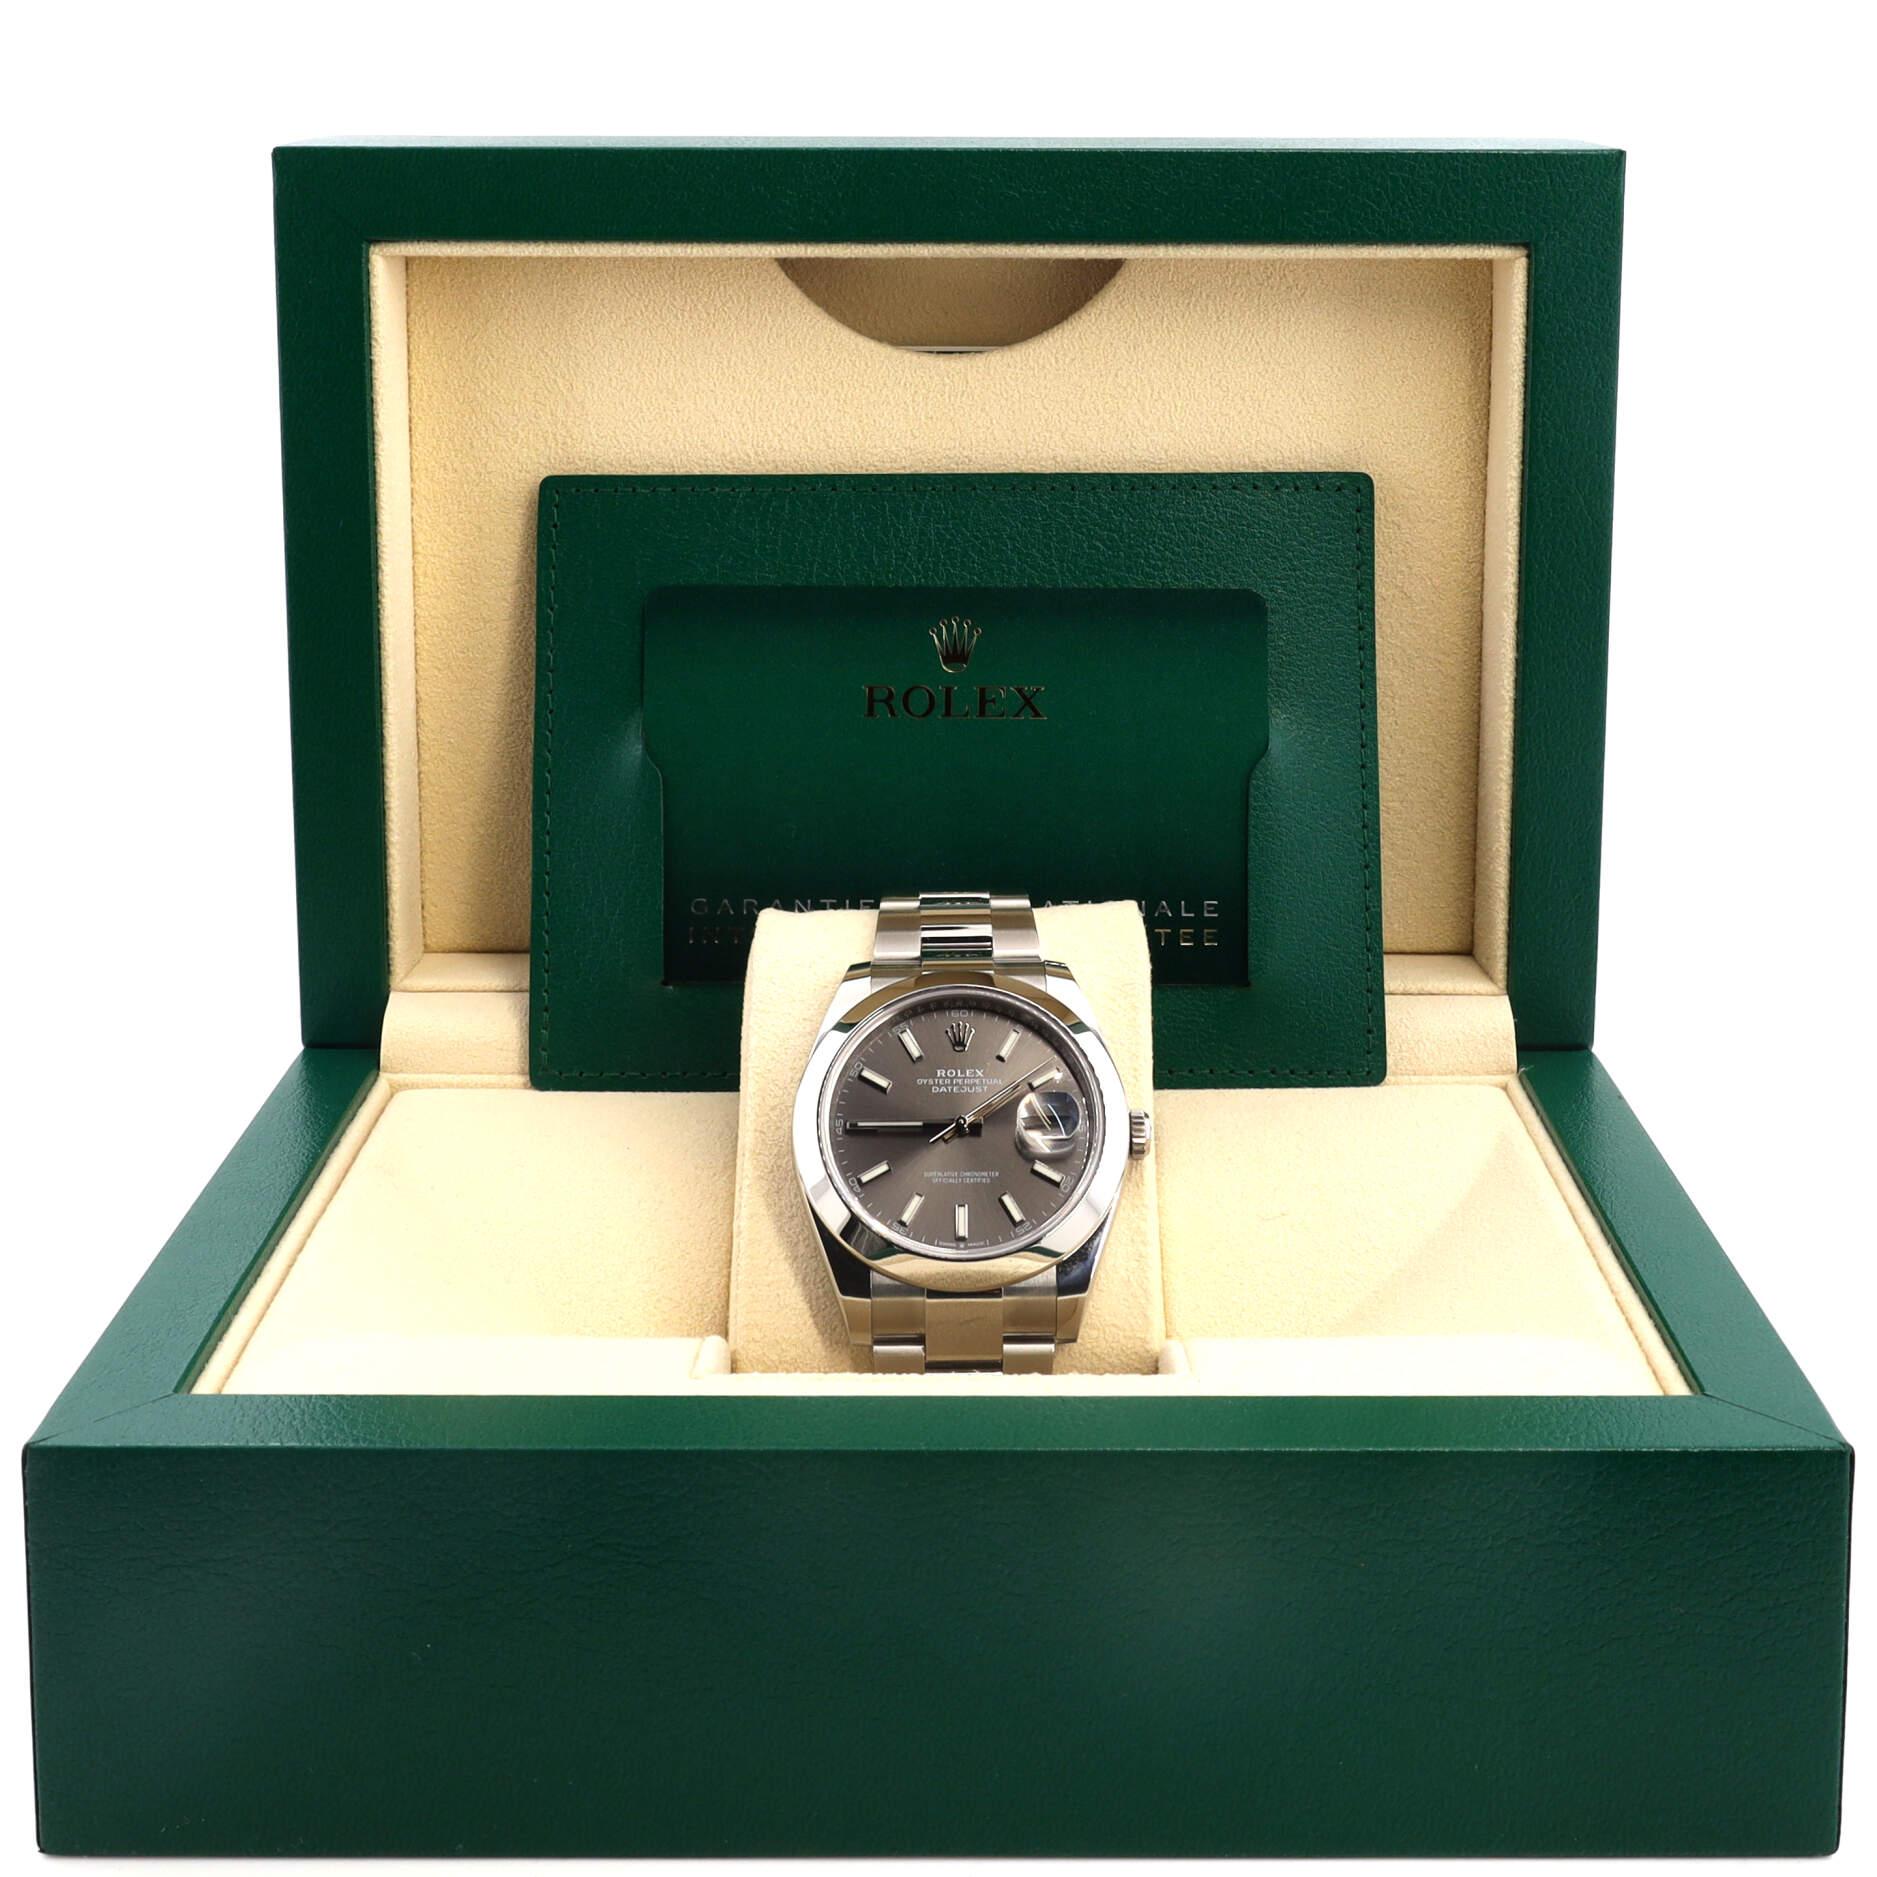 Condition: Excellent. Minor Wear throughout case and bracelet.
Accessories: Box, Warranty Card - Dated, Instruction Booklet
Measurements: Case Size/Width: 41mm, Watch Height: 12mm, Band Width: 21mm, Wrist circumference: 6.25